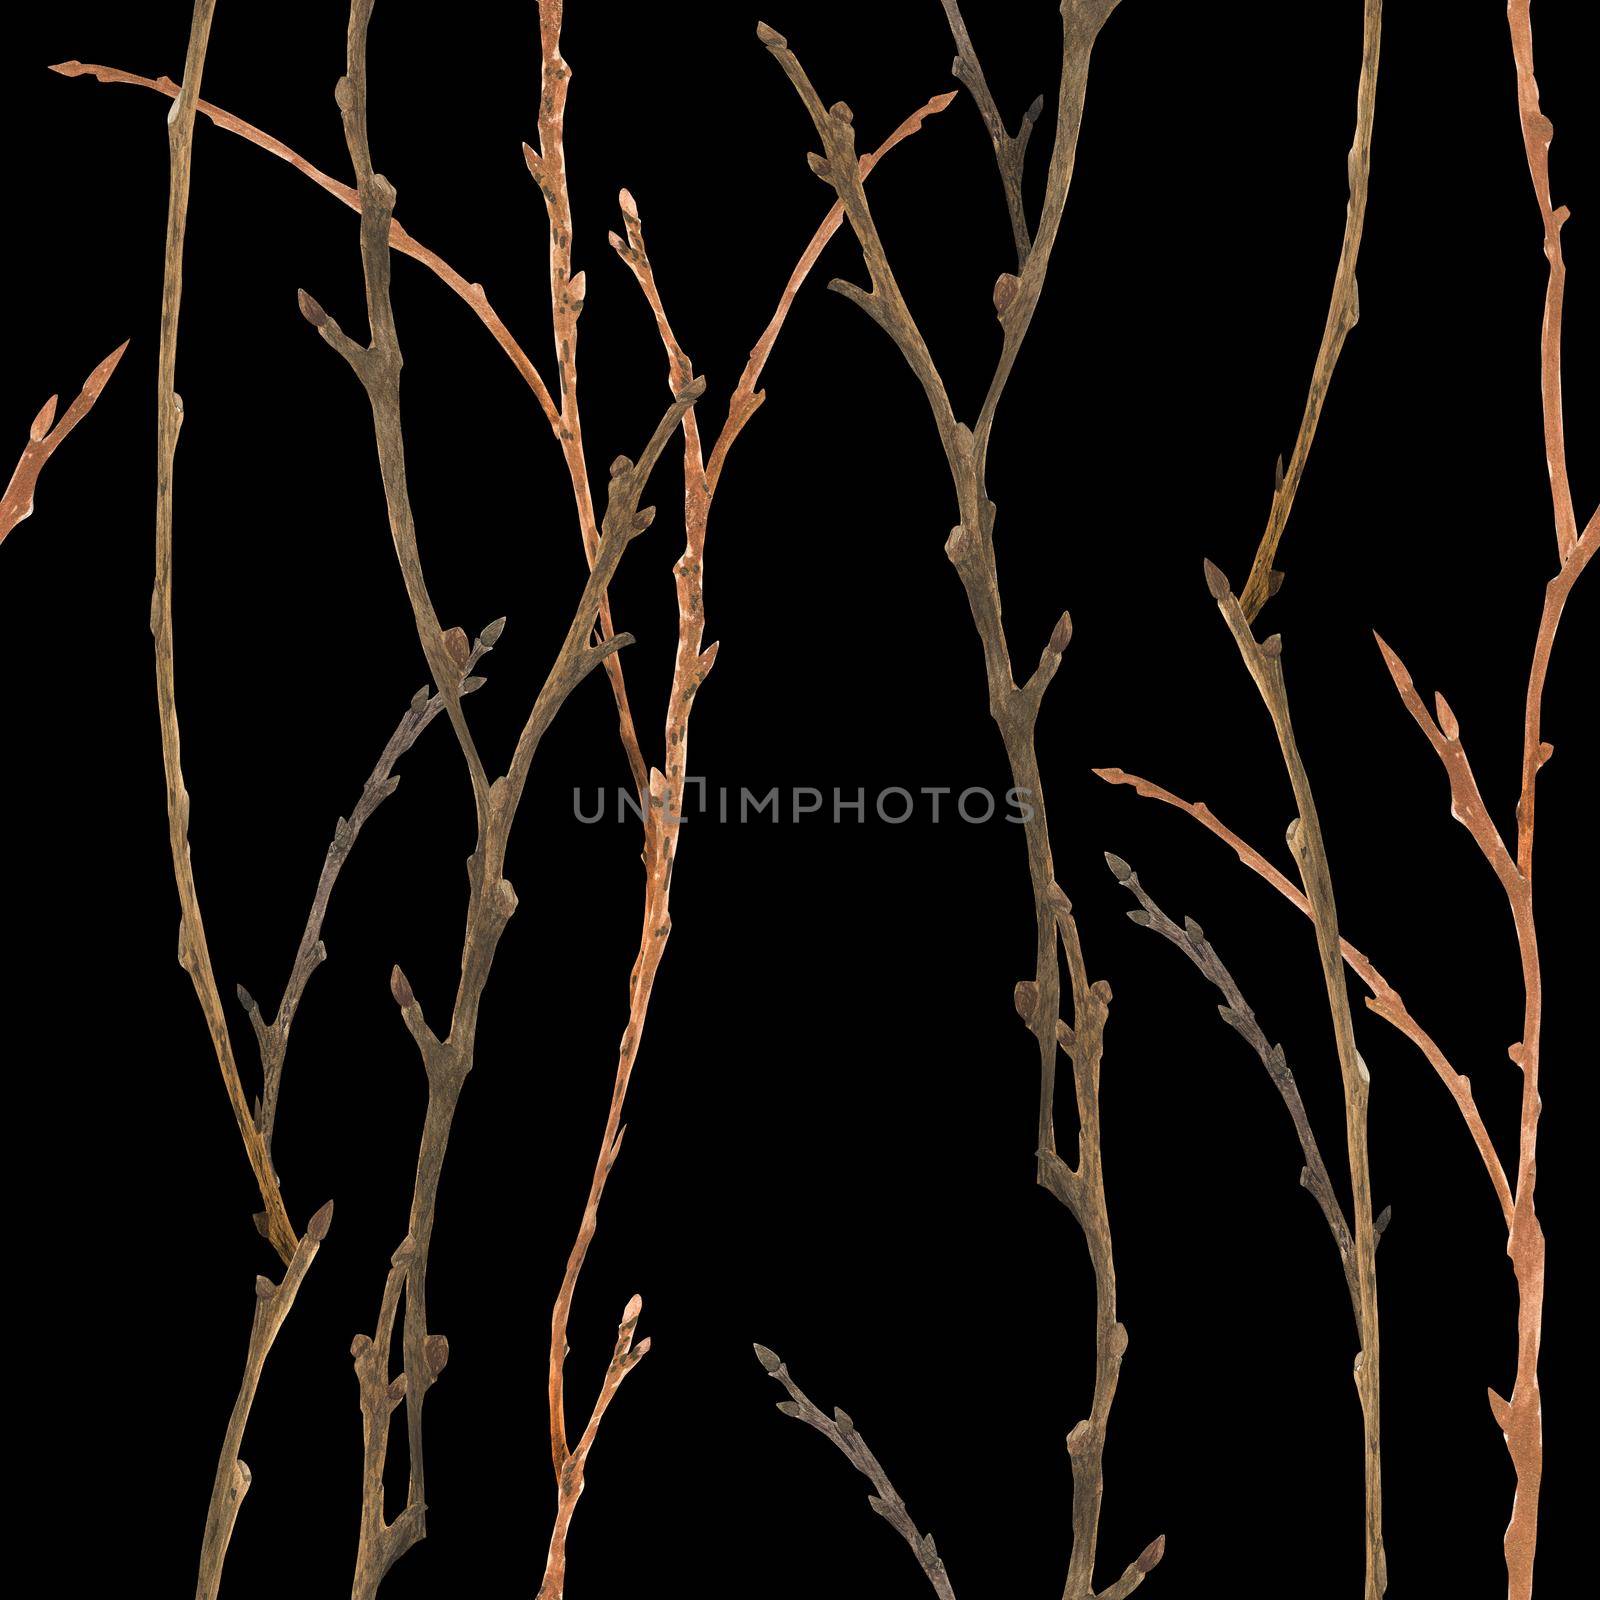 Botanical watercolor. Brown branches. Wild nature forest seamless pattern for Christmas design, path included.